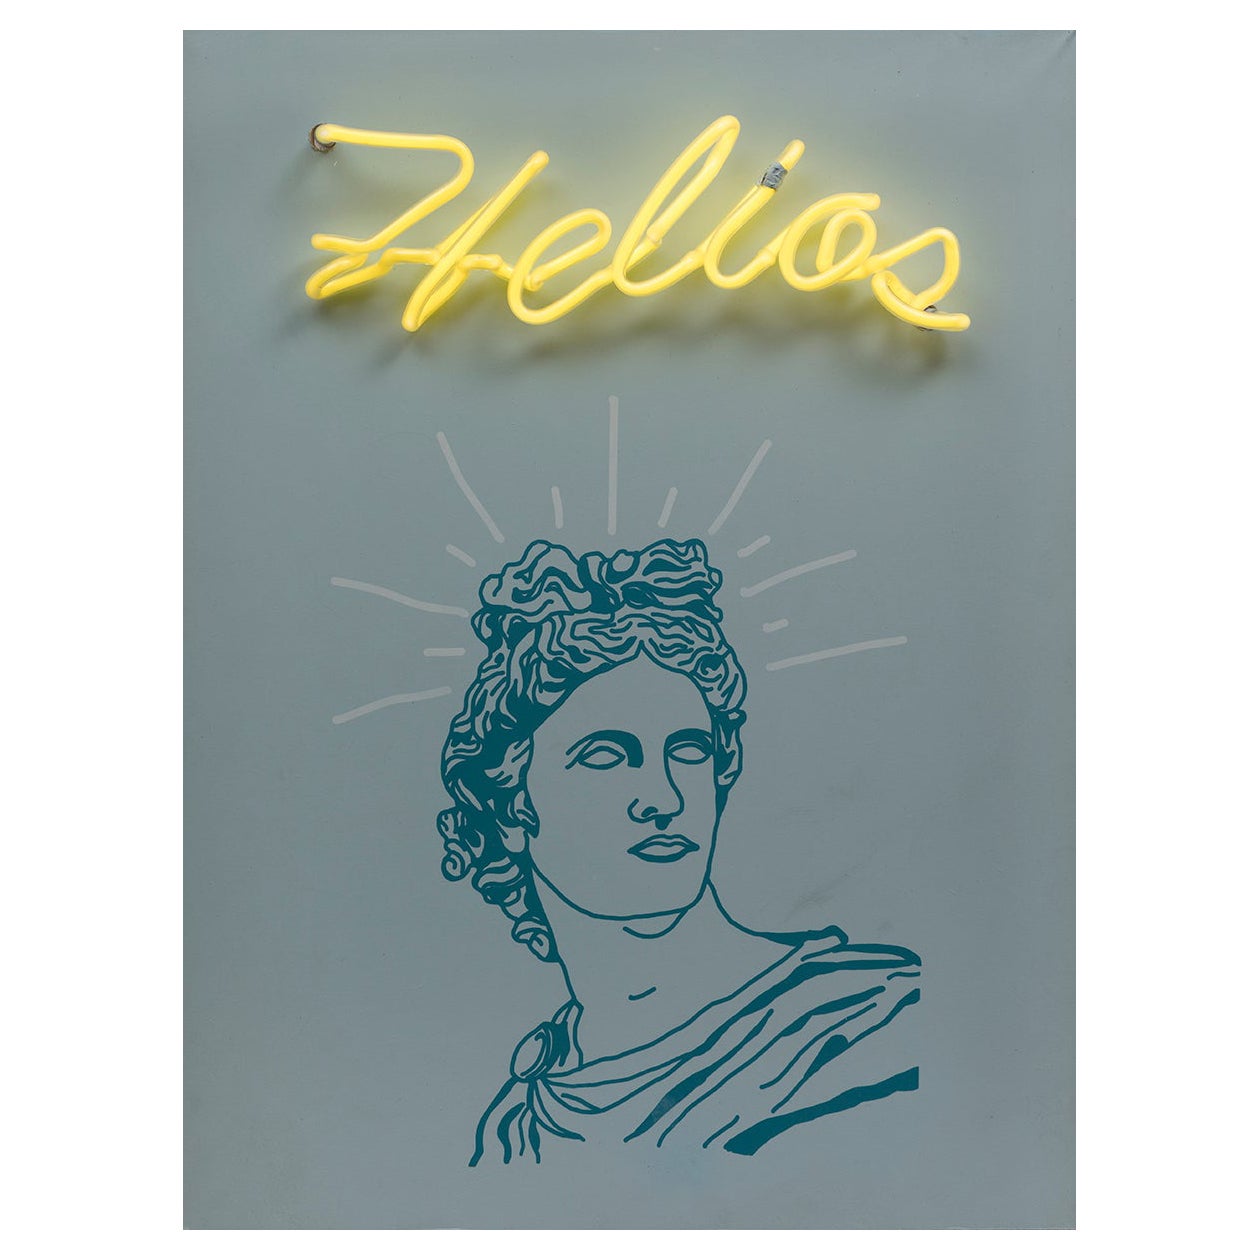 Helios, 2019  Paloma Castello 
From the series Neon Classics
Screen printing with neon lights
Dimensions: 24 H in x 18.1 W x 5.9 D in. 
Edition 7/10

In her work She likes to bring life to objects or icons from the past, intervening in them a bit,